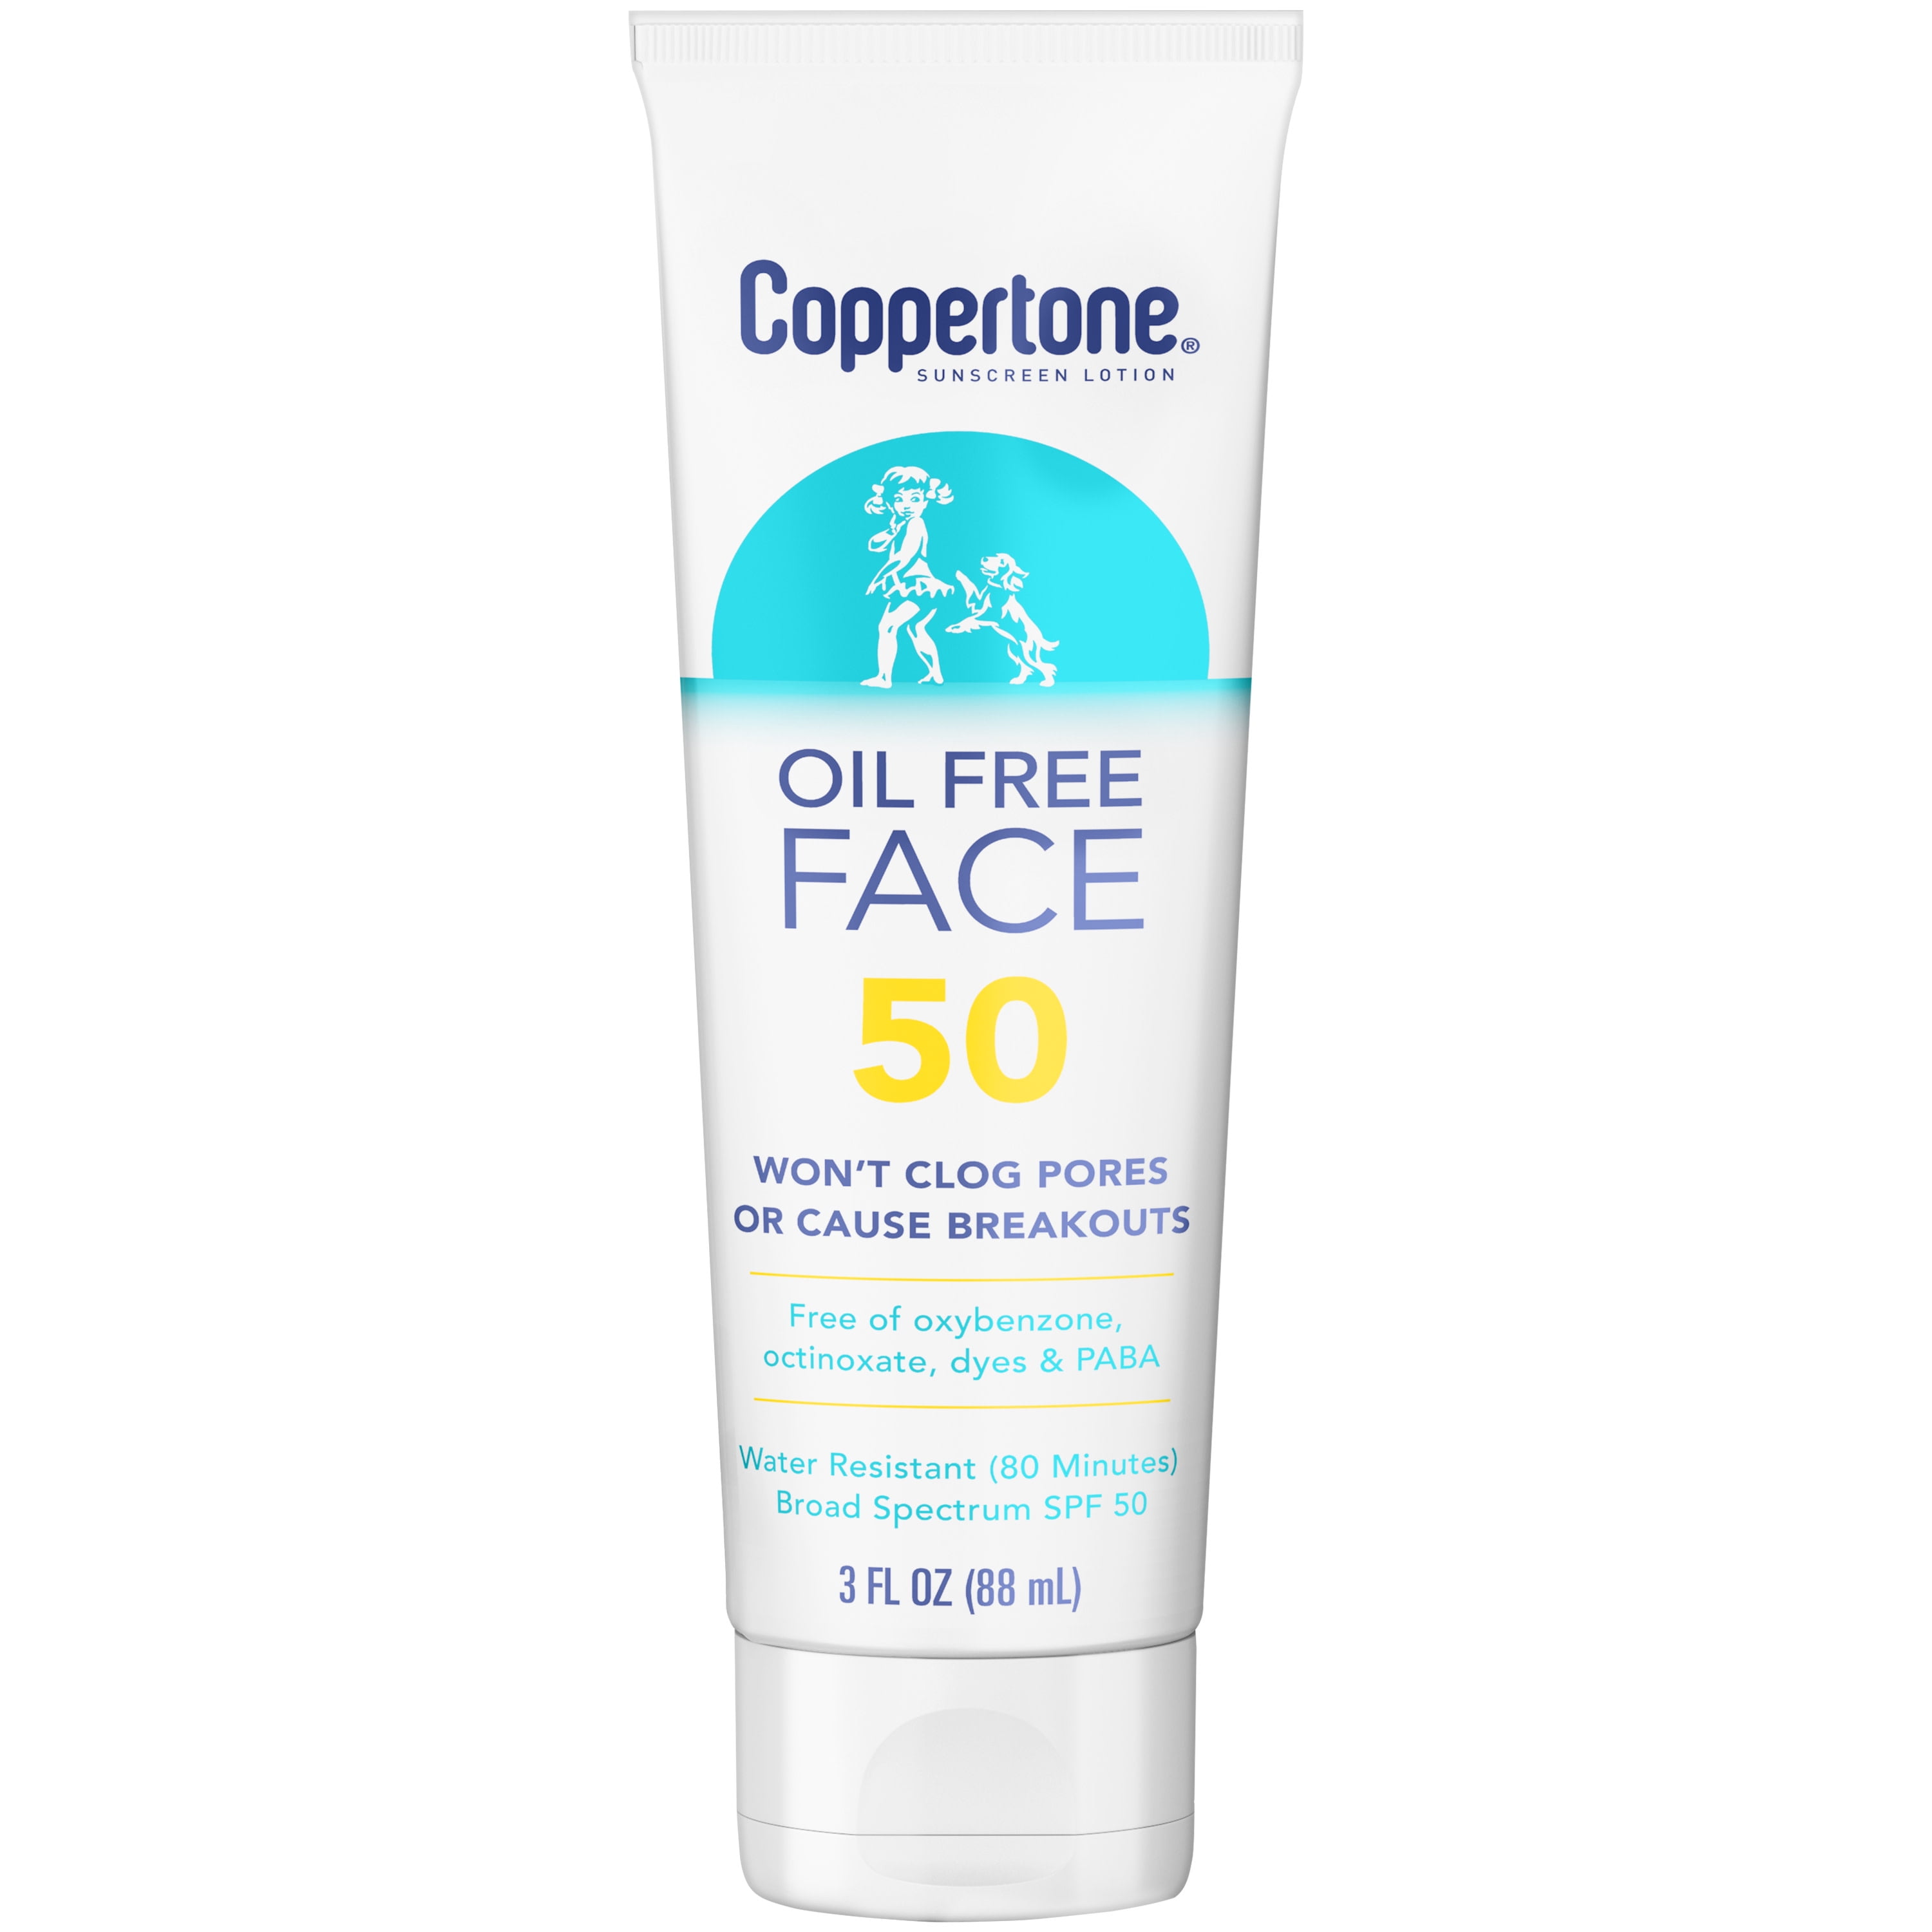 Coppertone Face SPF 50 Oil Free Sunscreen Lotion, for Face, fl. -